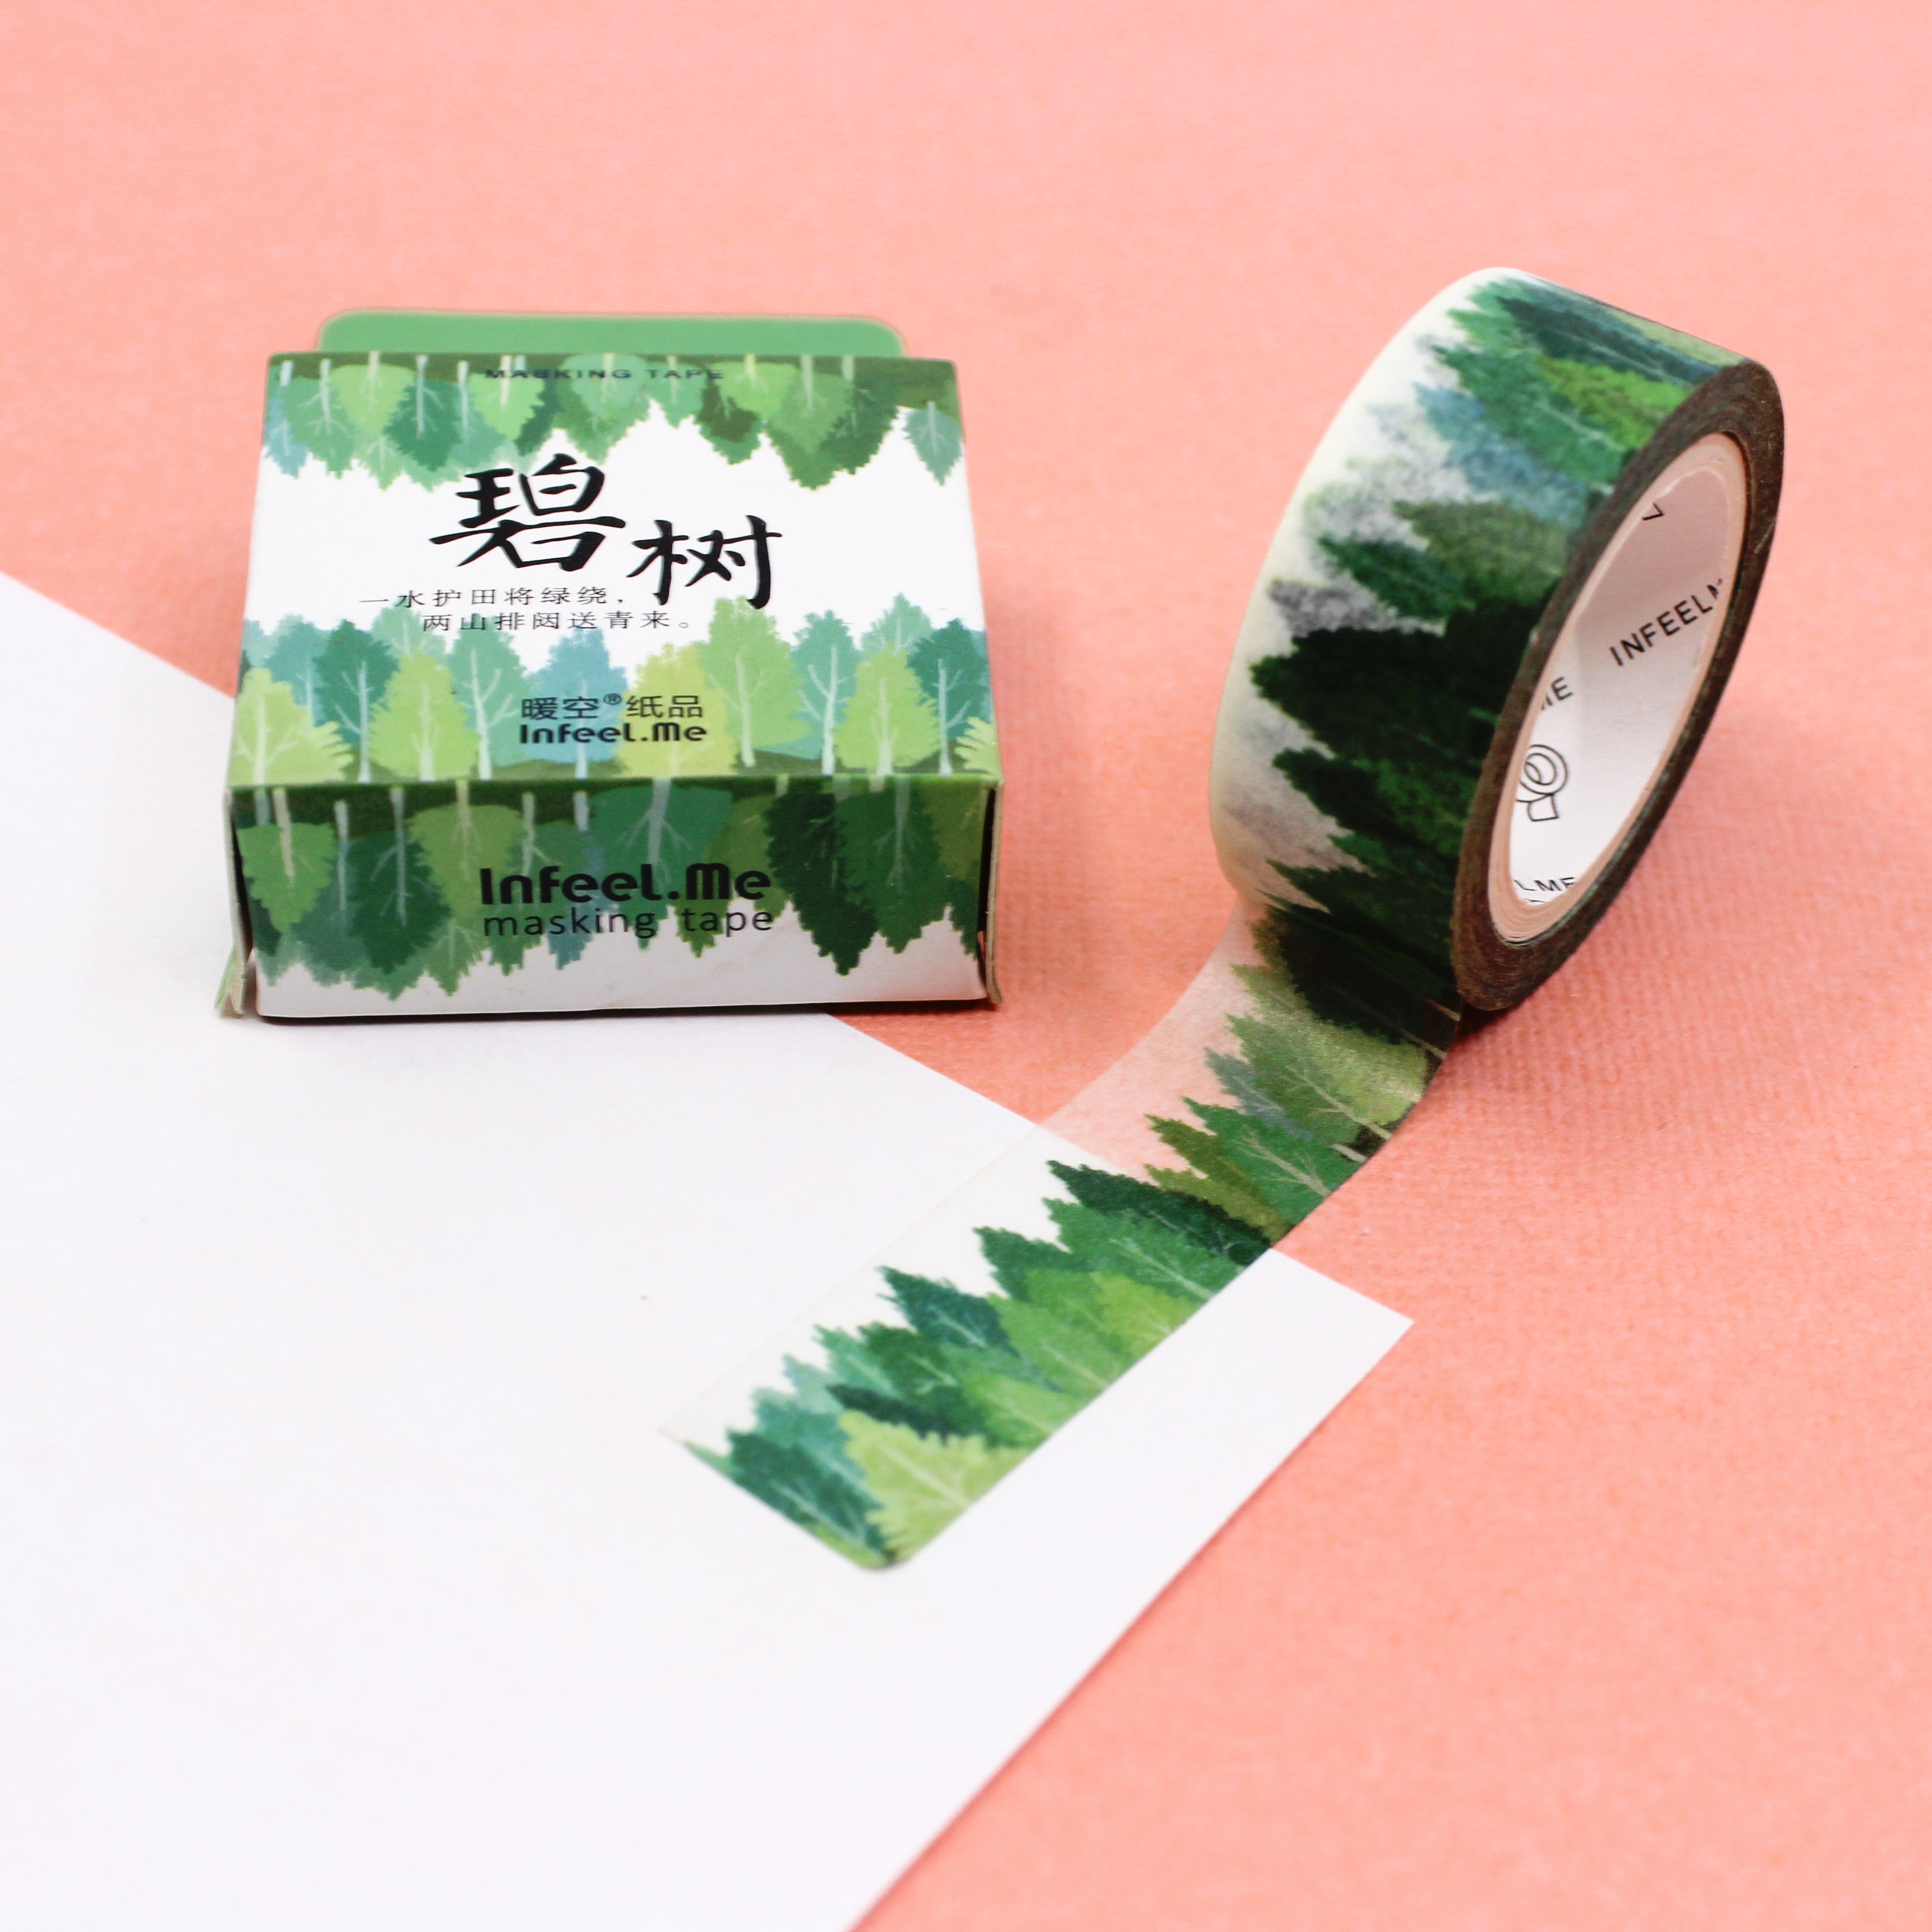 This is a green layered forest landscape tree pattern washi tape from BBB Supplies Craft Shop